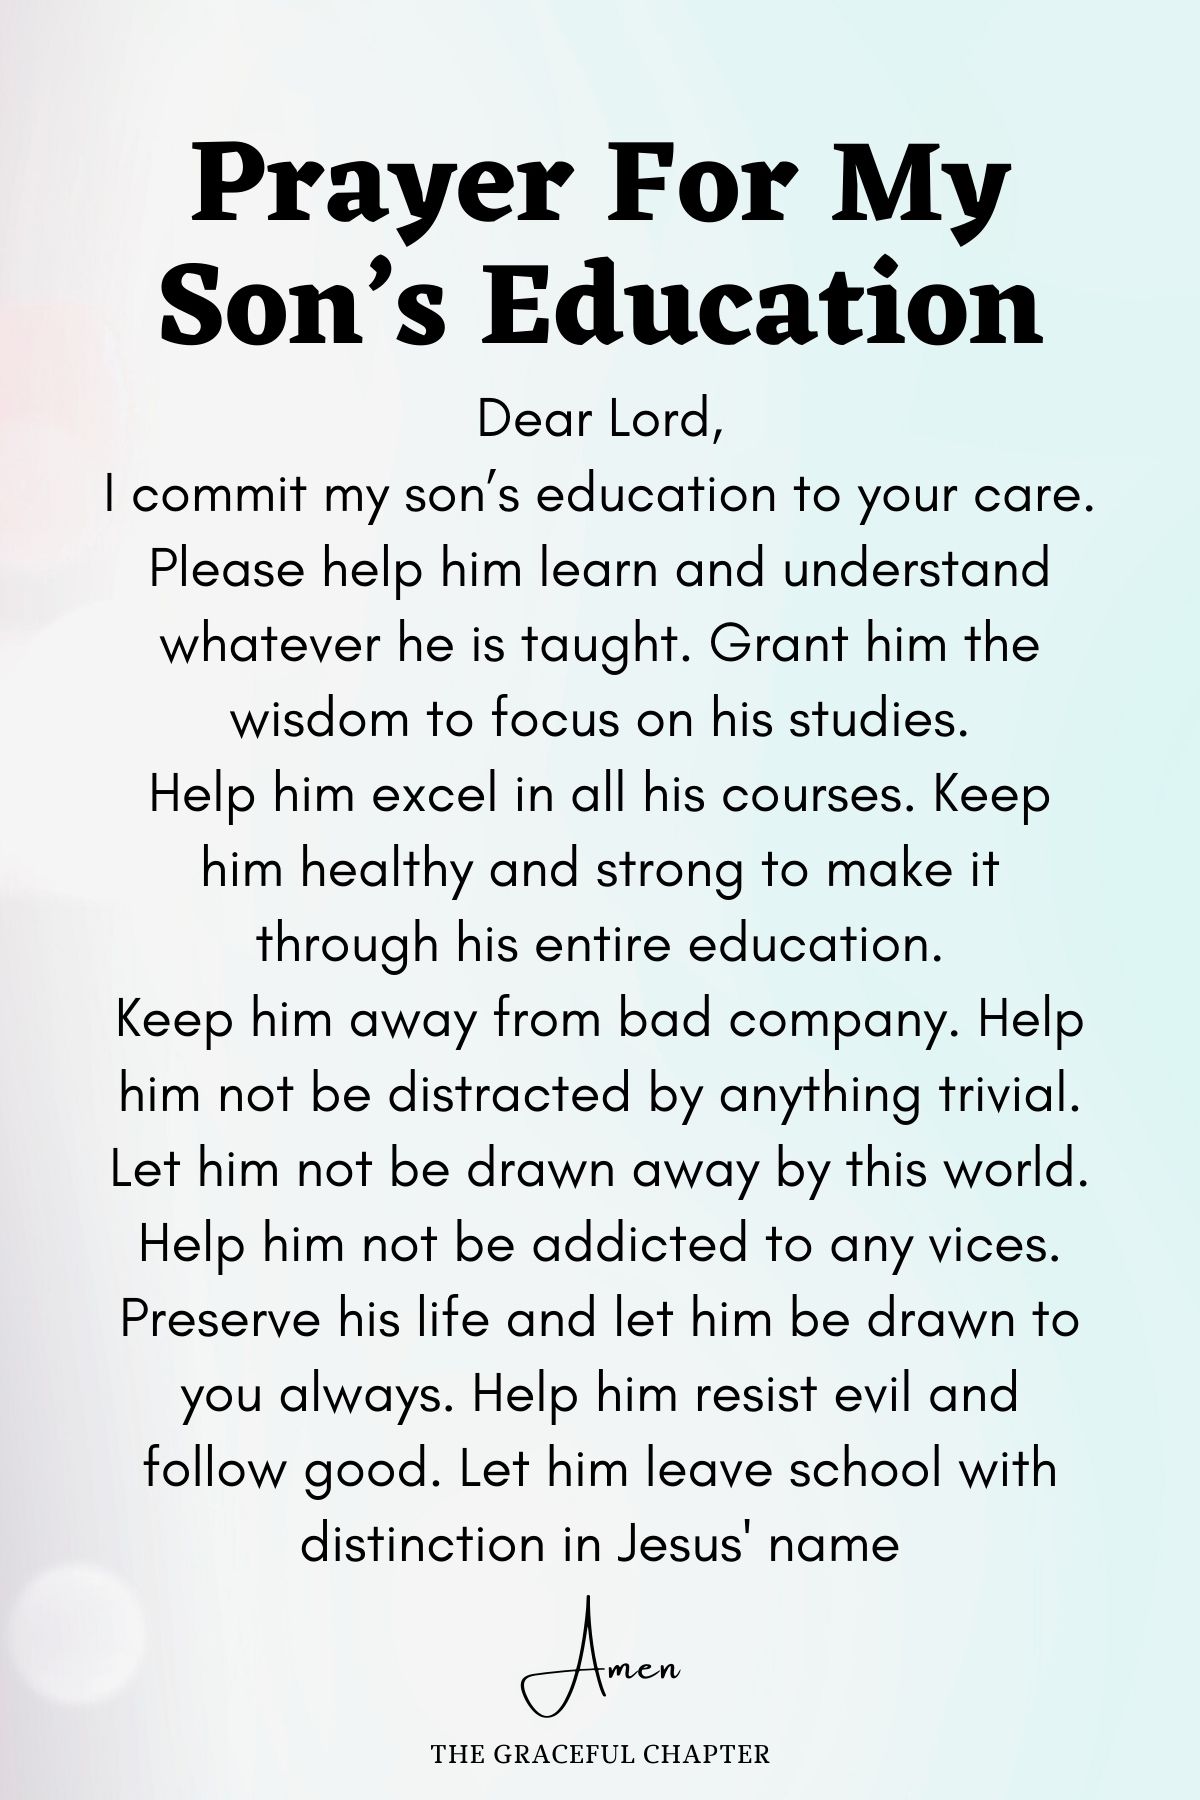 Prayer for my son’s education - prayers for my son